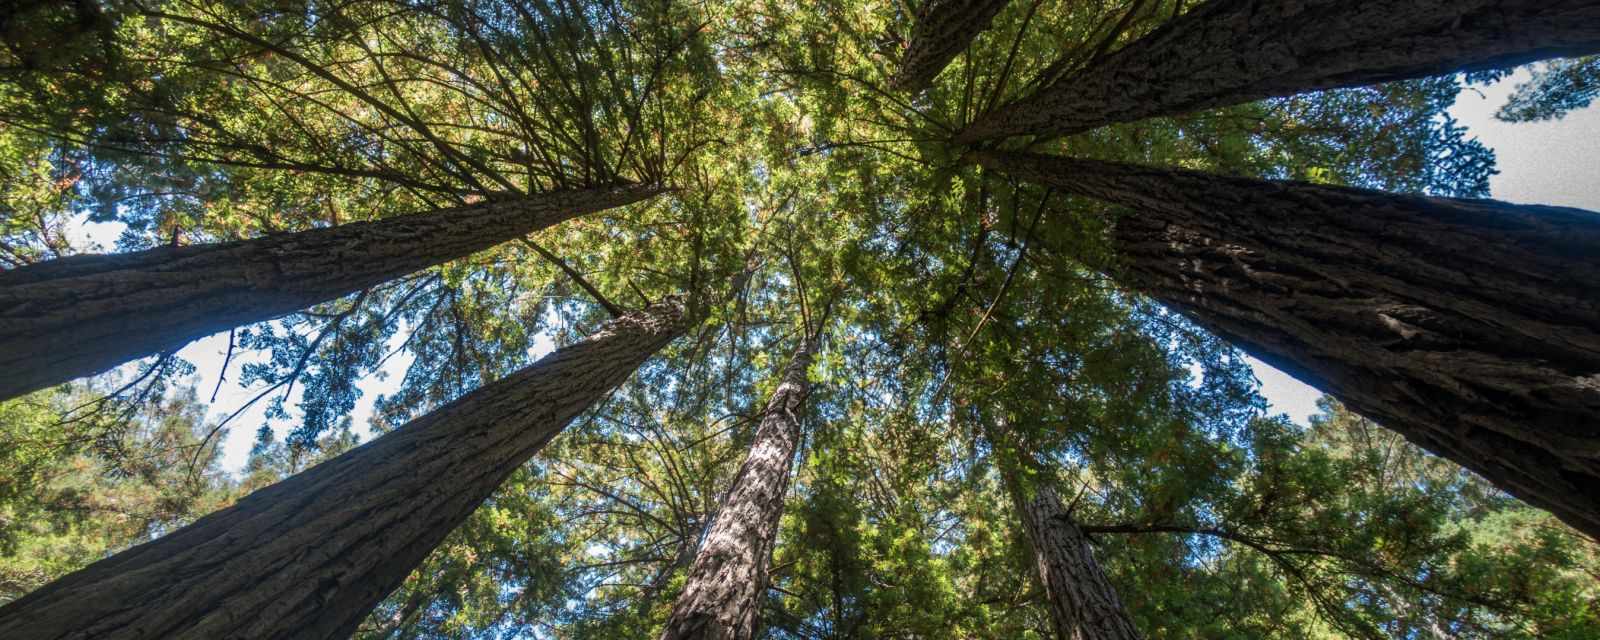 3 Hiking Trails in Muir Woods National Monument